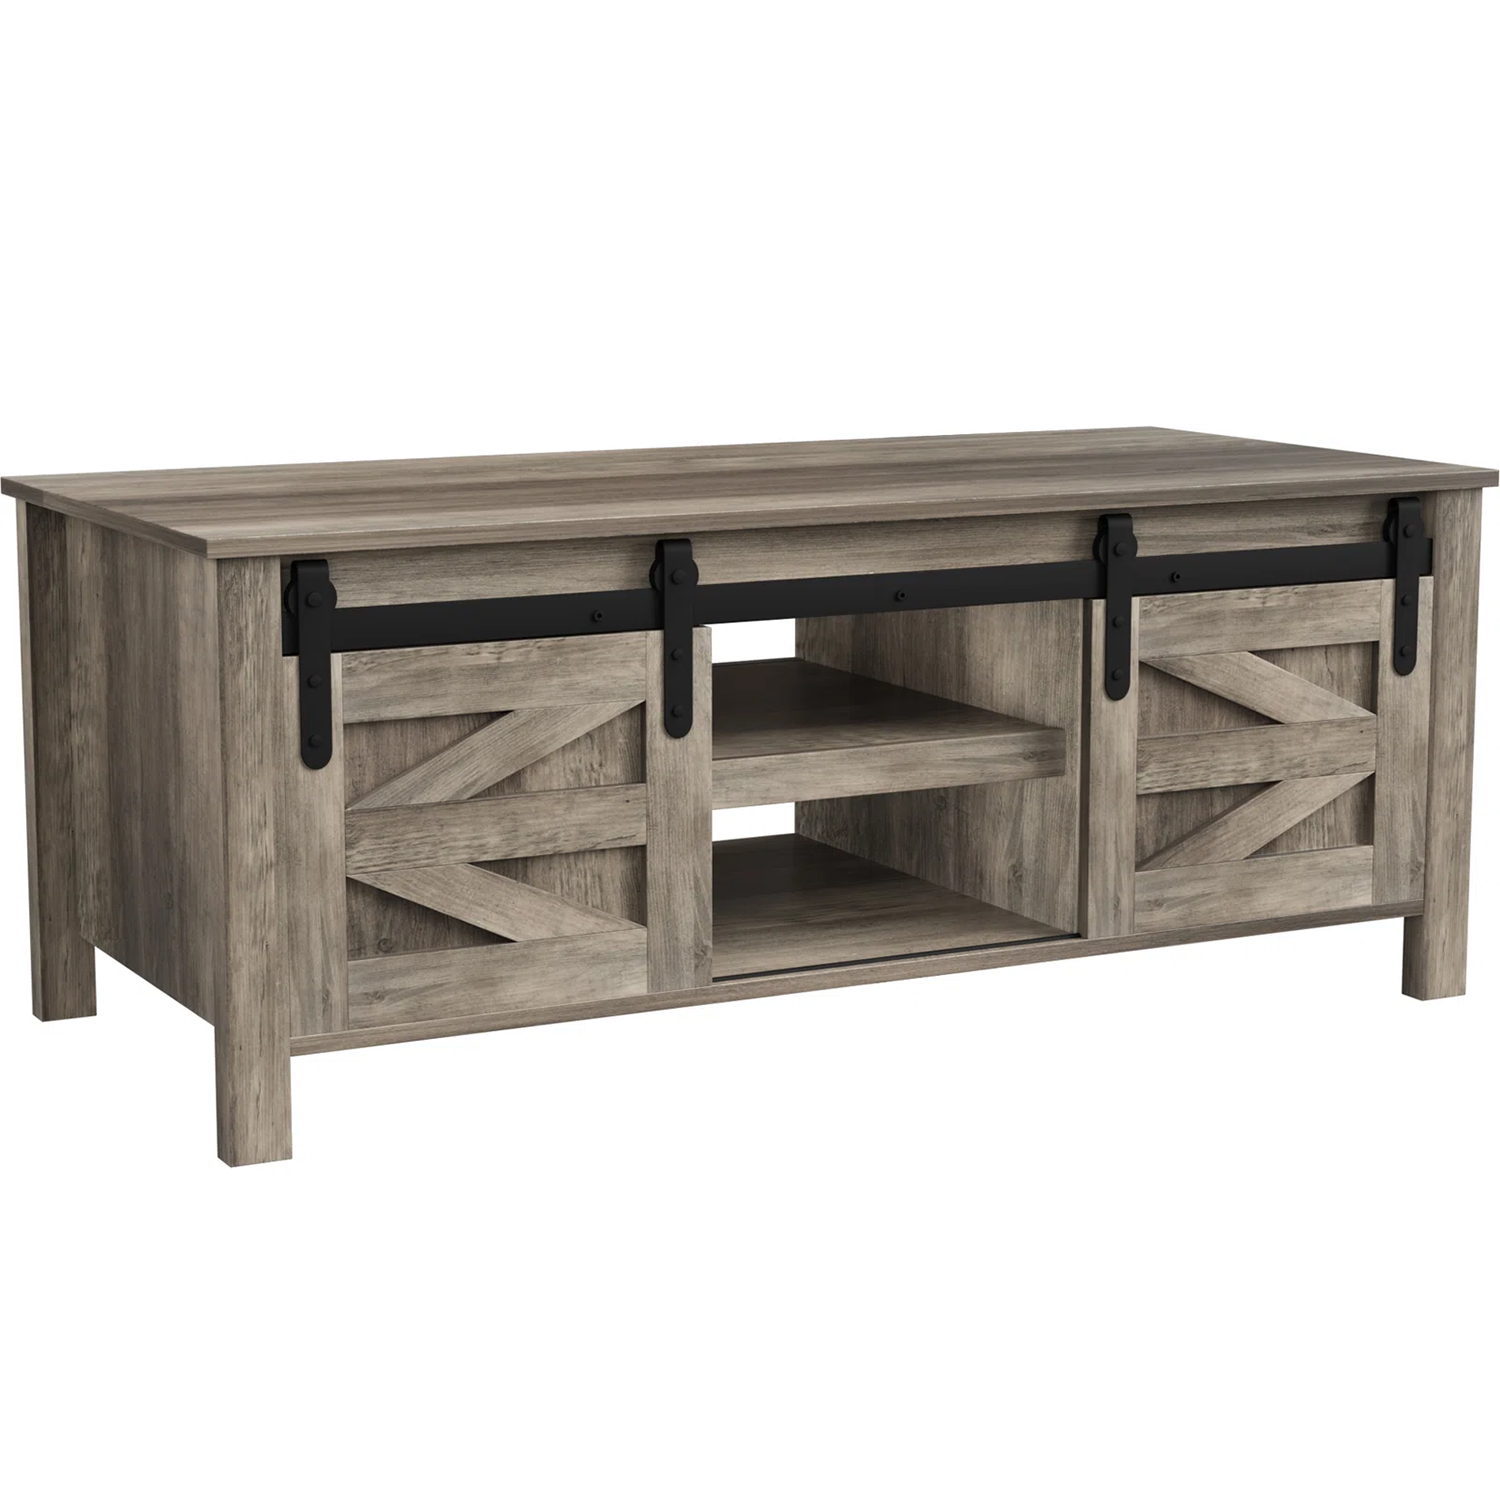 Coffee Tables at Lowes.com